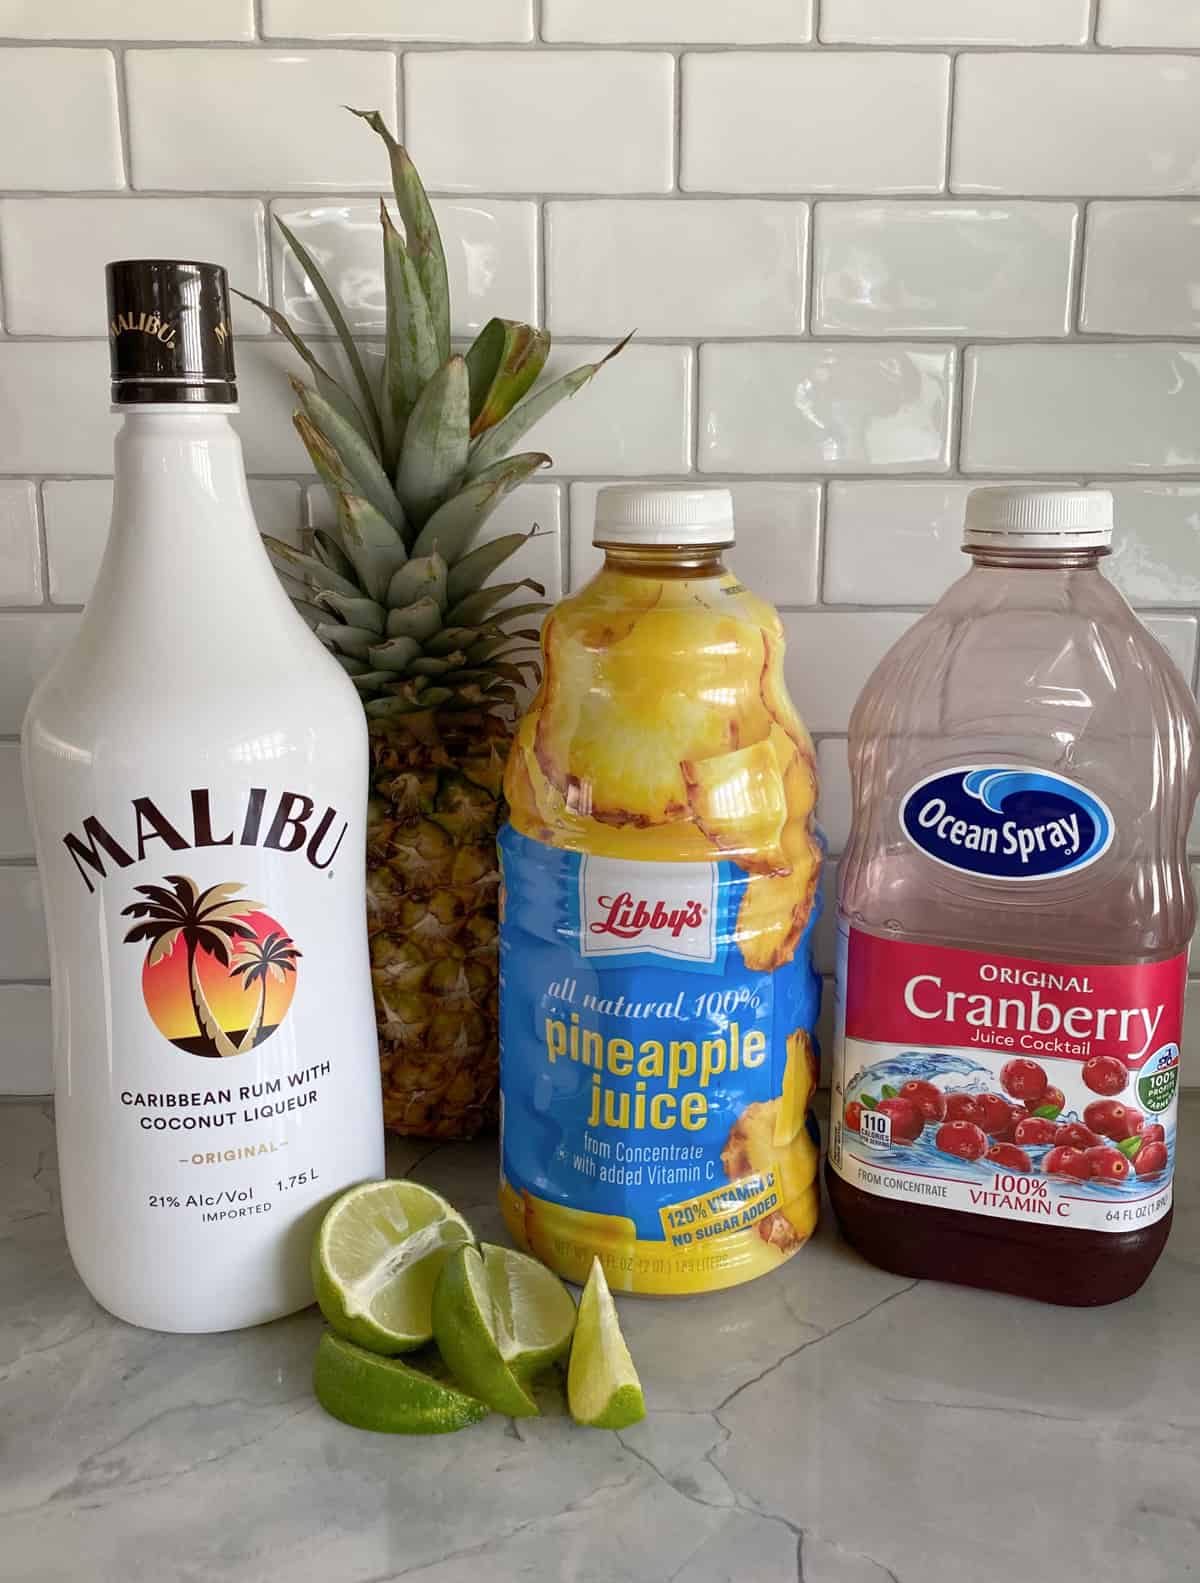 Ingredients on counter: Malibu Rum, Pineapple Juice, Cranberry juice, and limes.